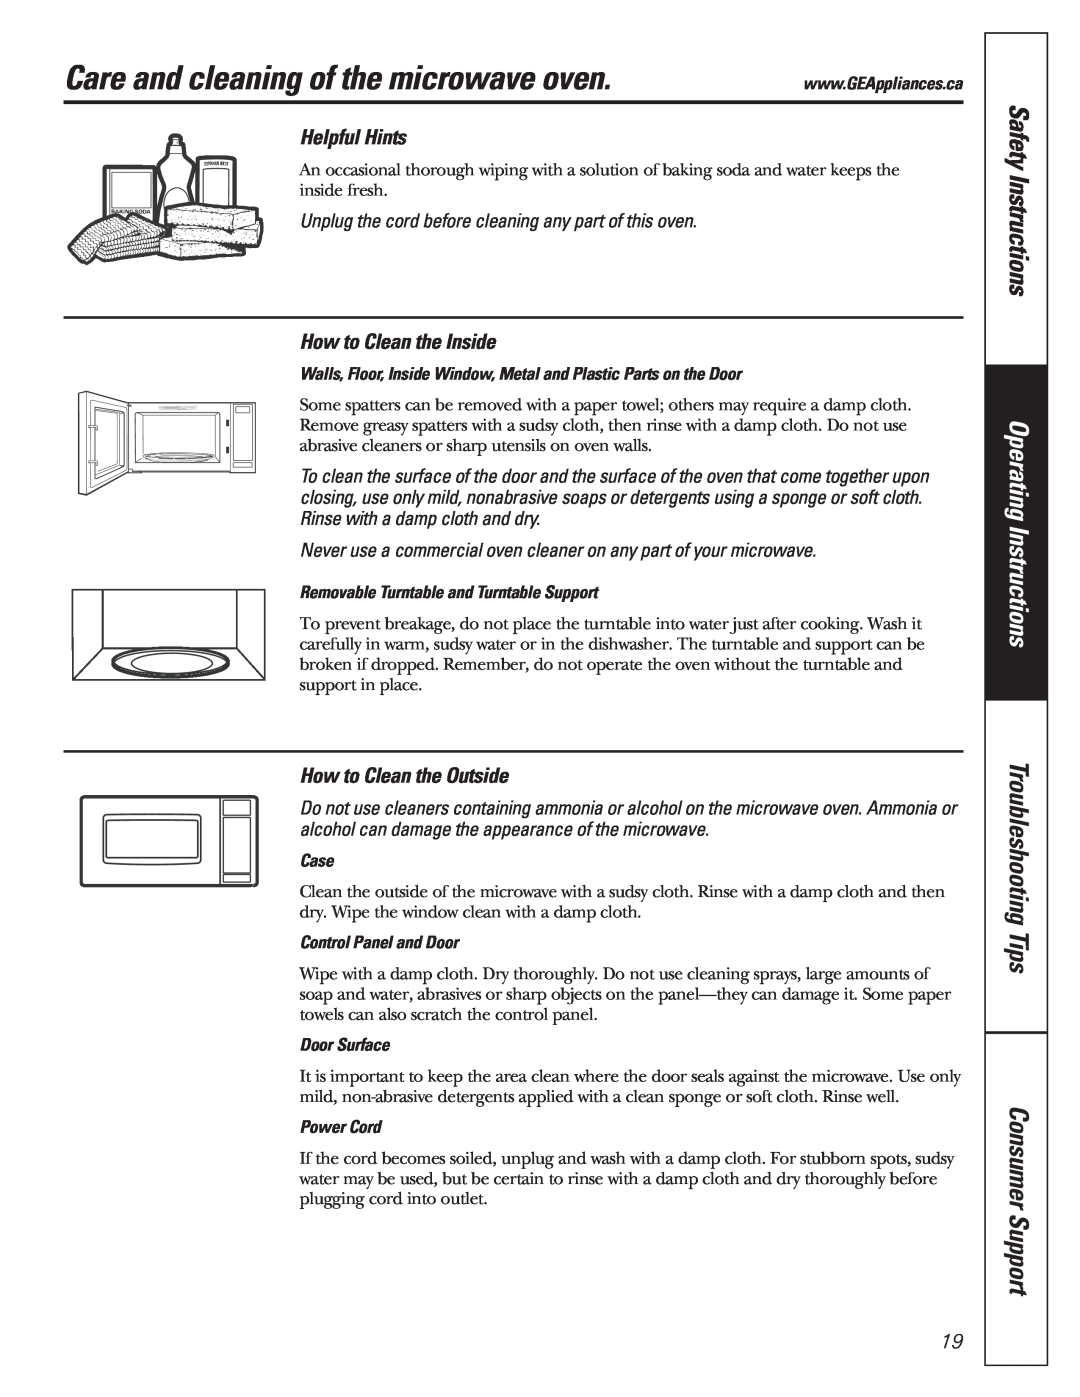 GE 350A4502P592 02-07 ATS manual Care and cleaning of the microwave oven, Helpful Hints, How to Clean the Inside 